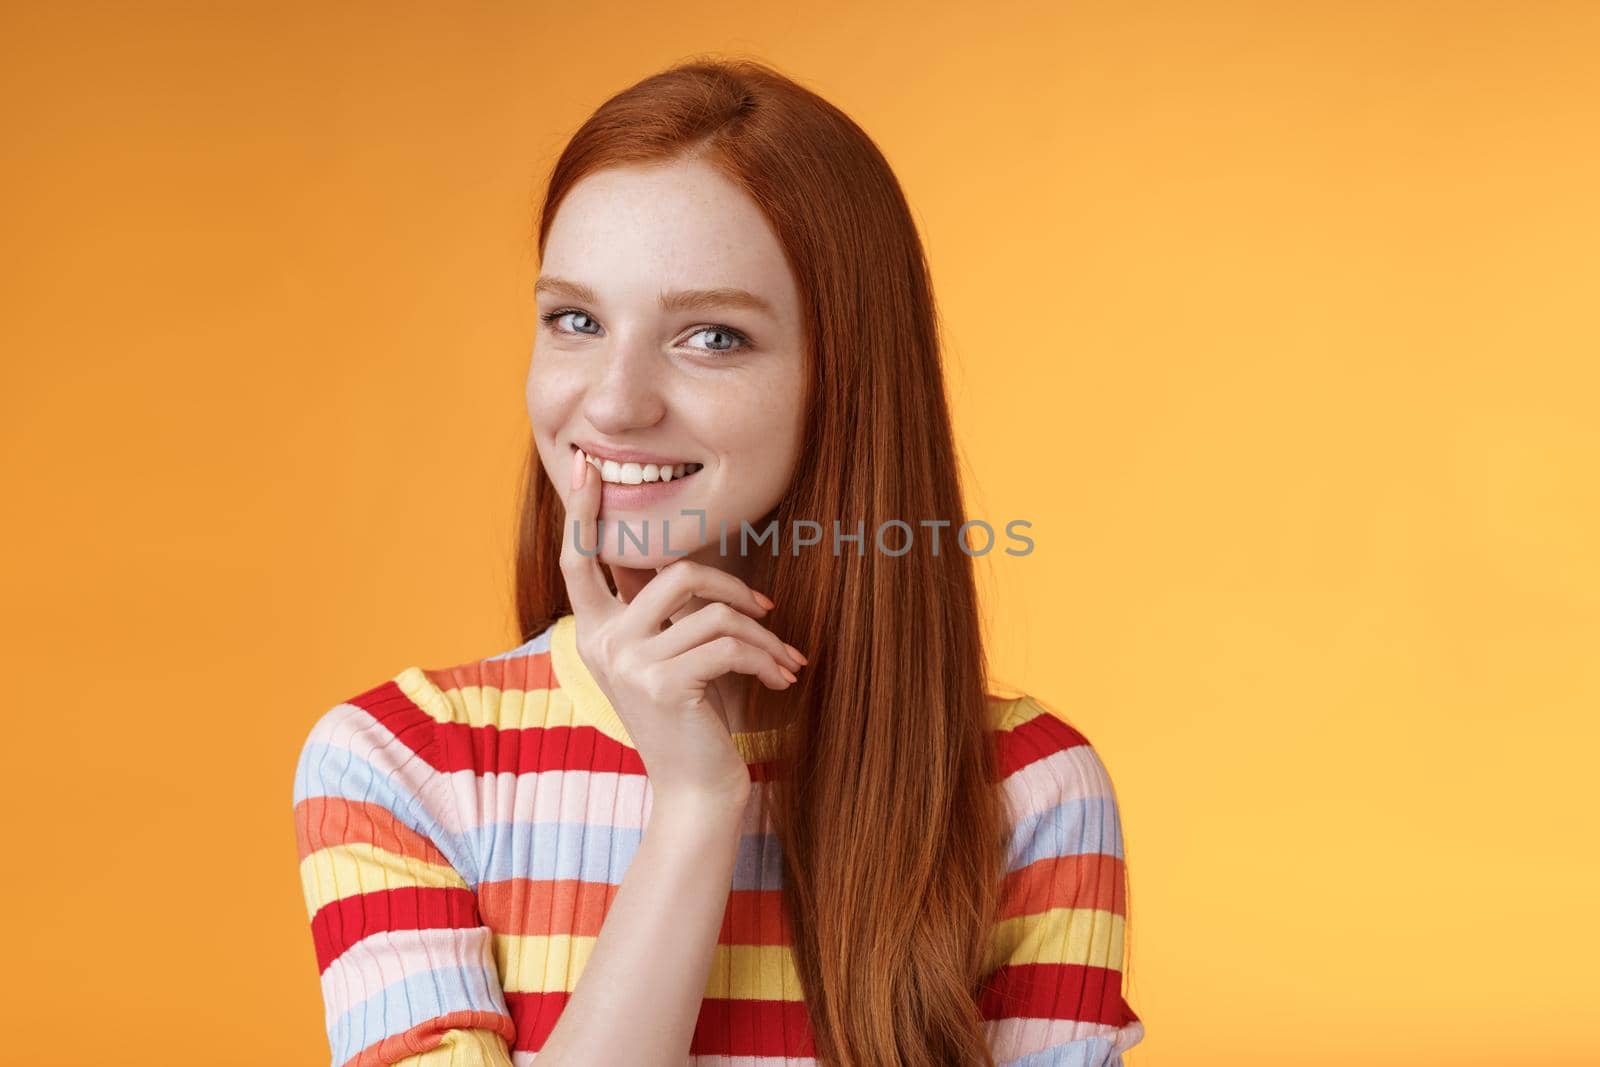 Curious devious redhead young 20s girlfriend have excellent idea smirking tricky touch lip flirty mysteriously glancing camera have plans preparing interesting surprise, standing orange background.